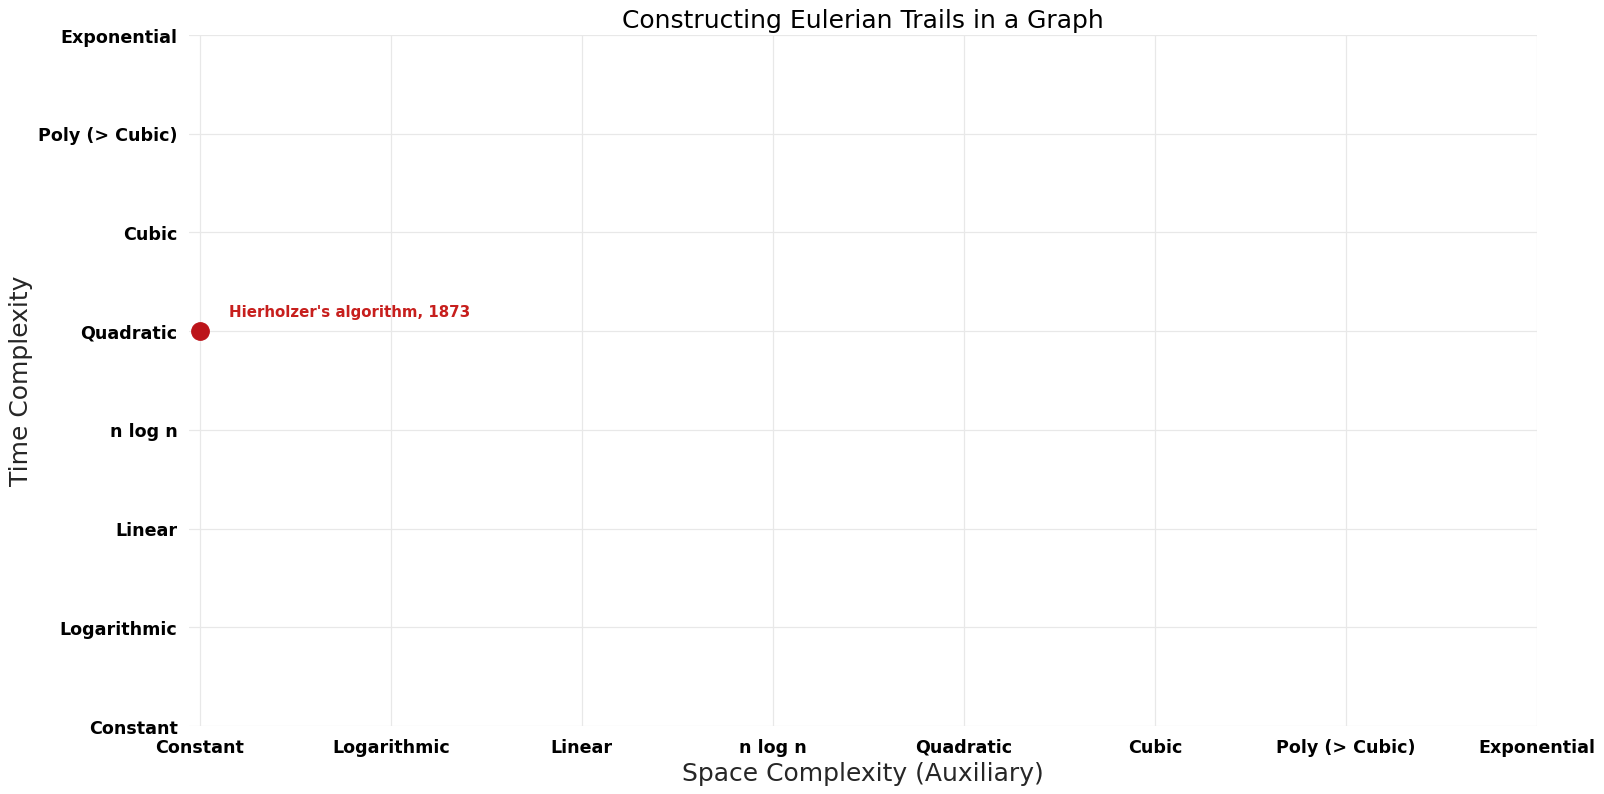 File:Constructing Eulerian Trails in a Graph - Pareto Frontier.png